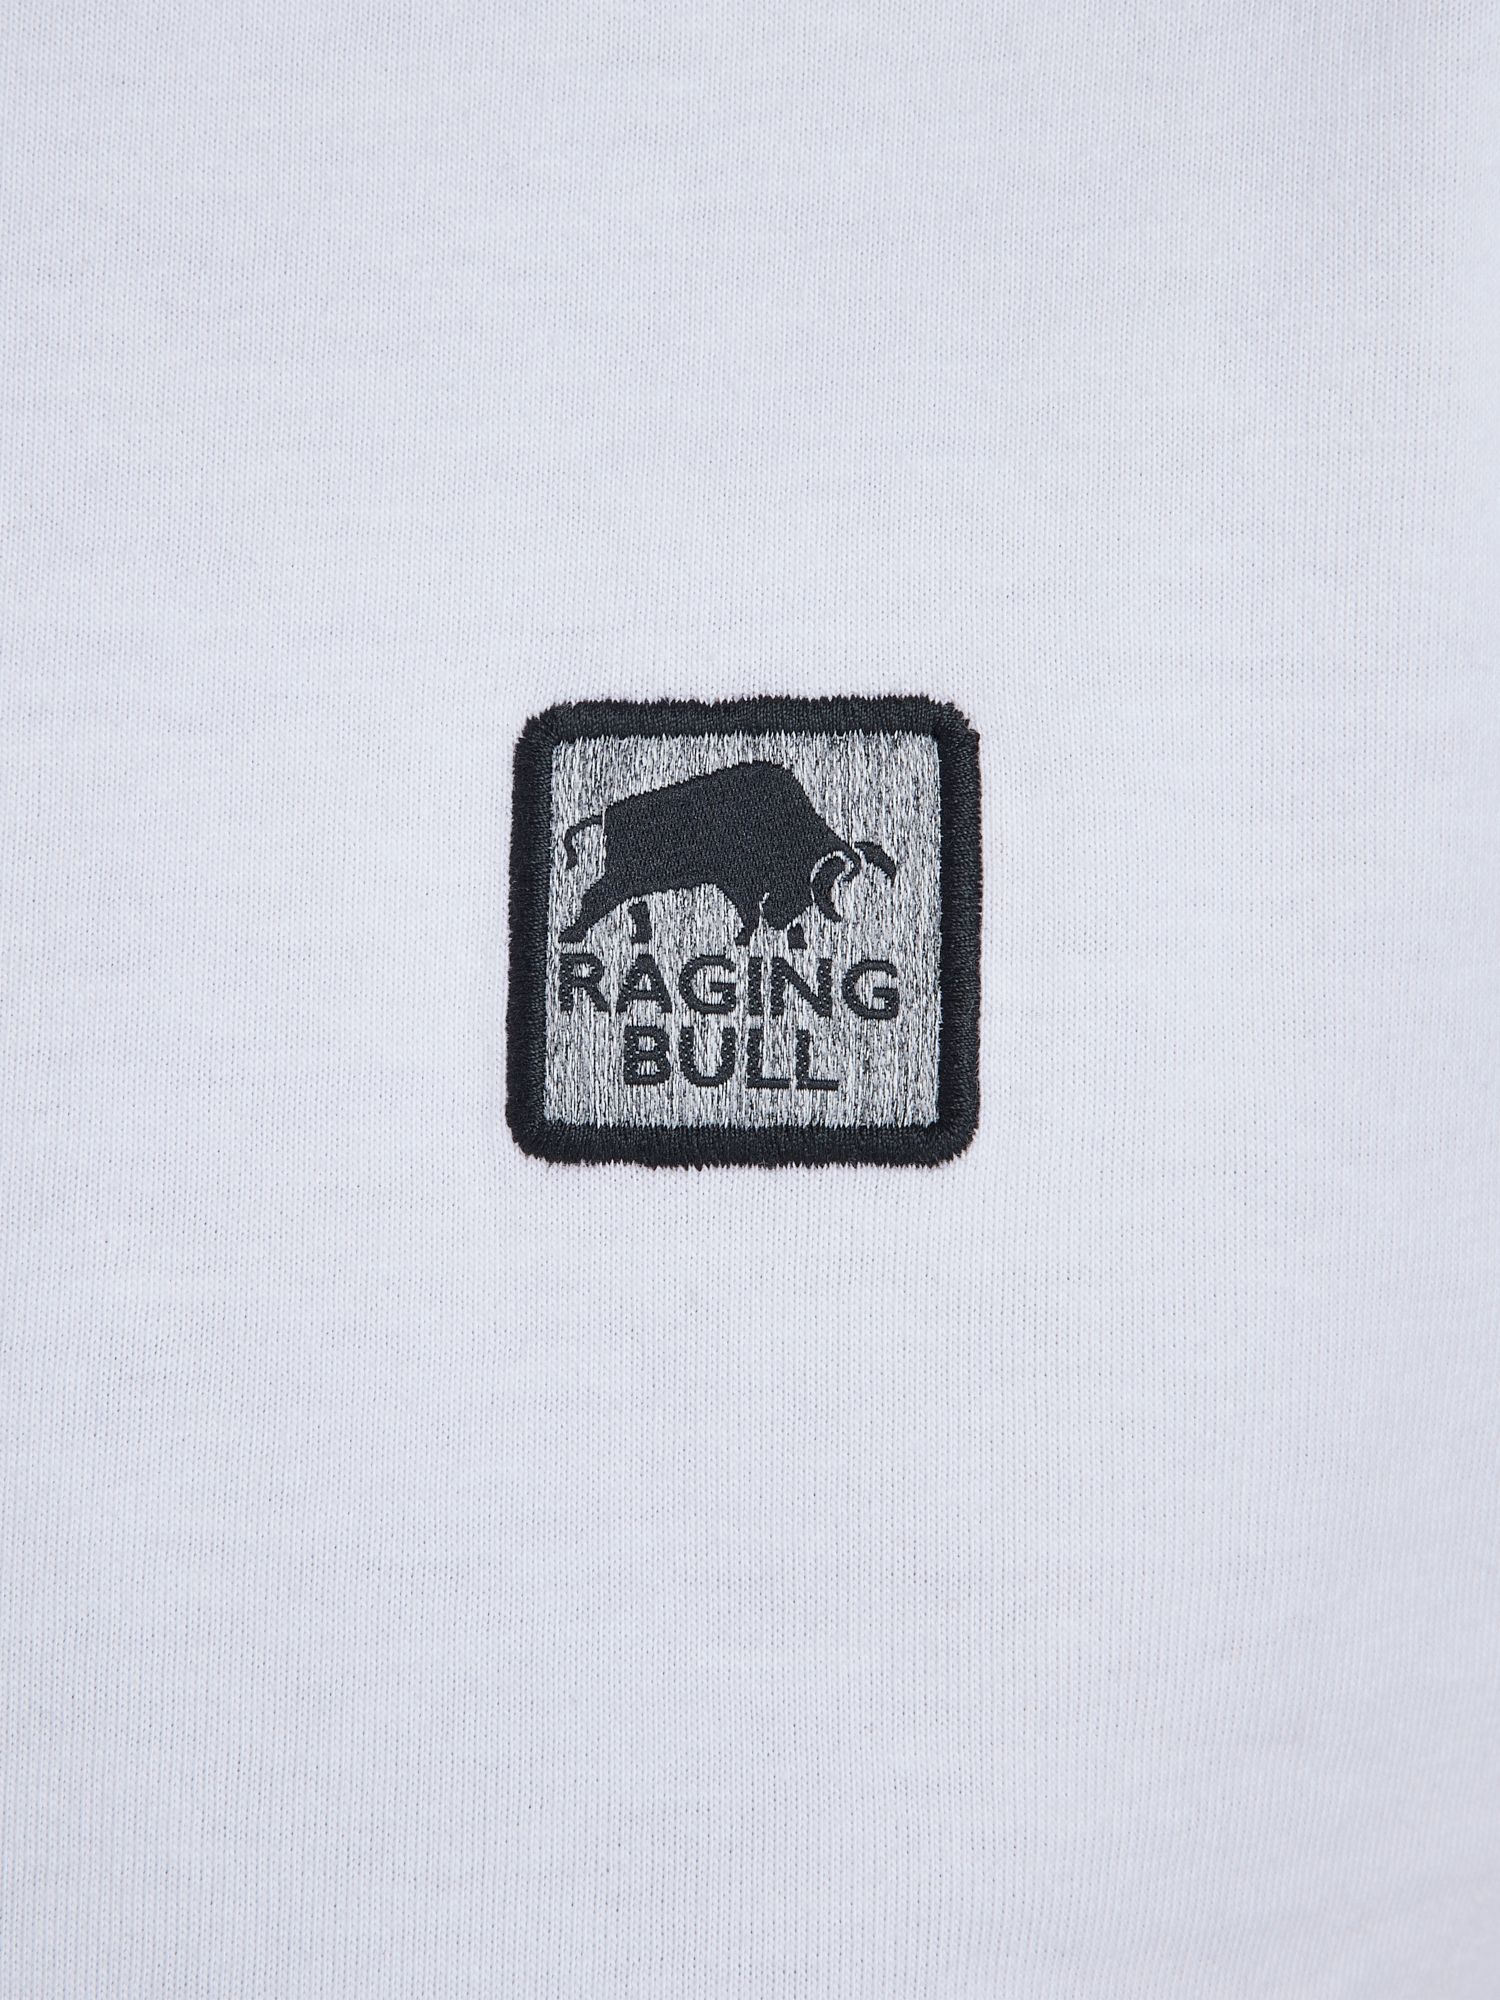 Raging Bull Classic Woven Patch T-Shirt, White, L